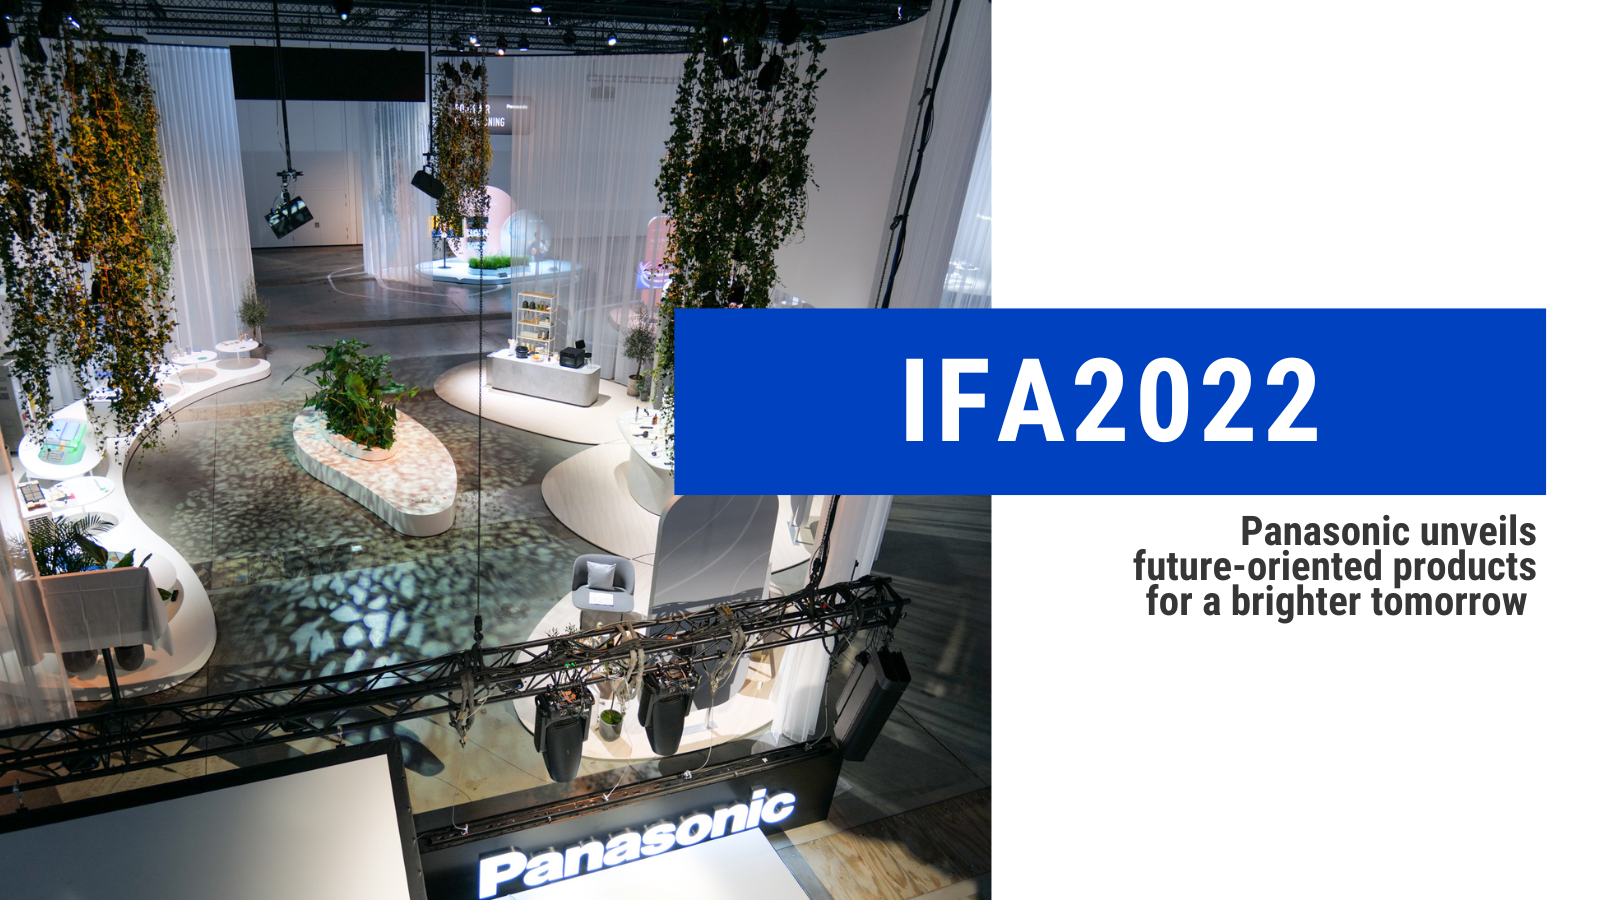 Panasonic Unveils Future-Oriented Products for a Brighter Tomorrow at IFA 2022